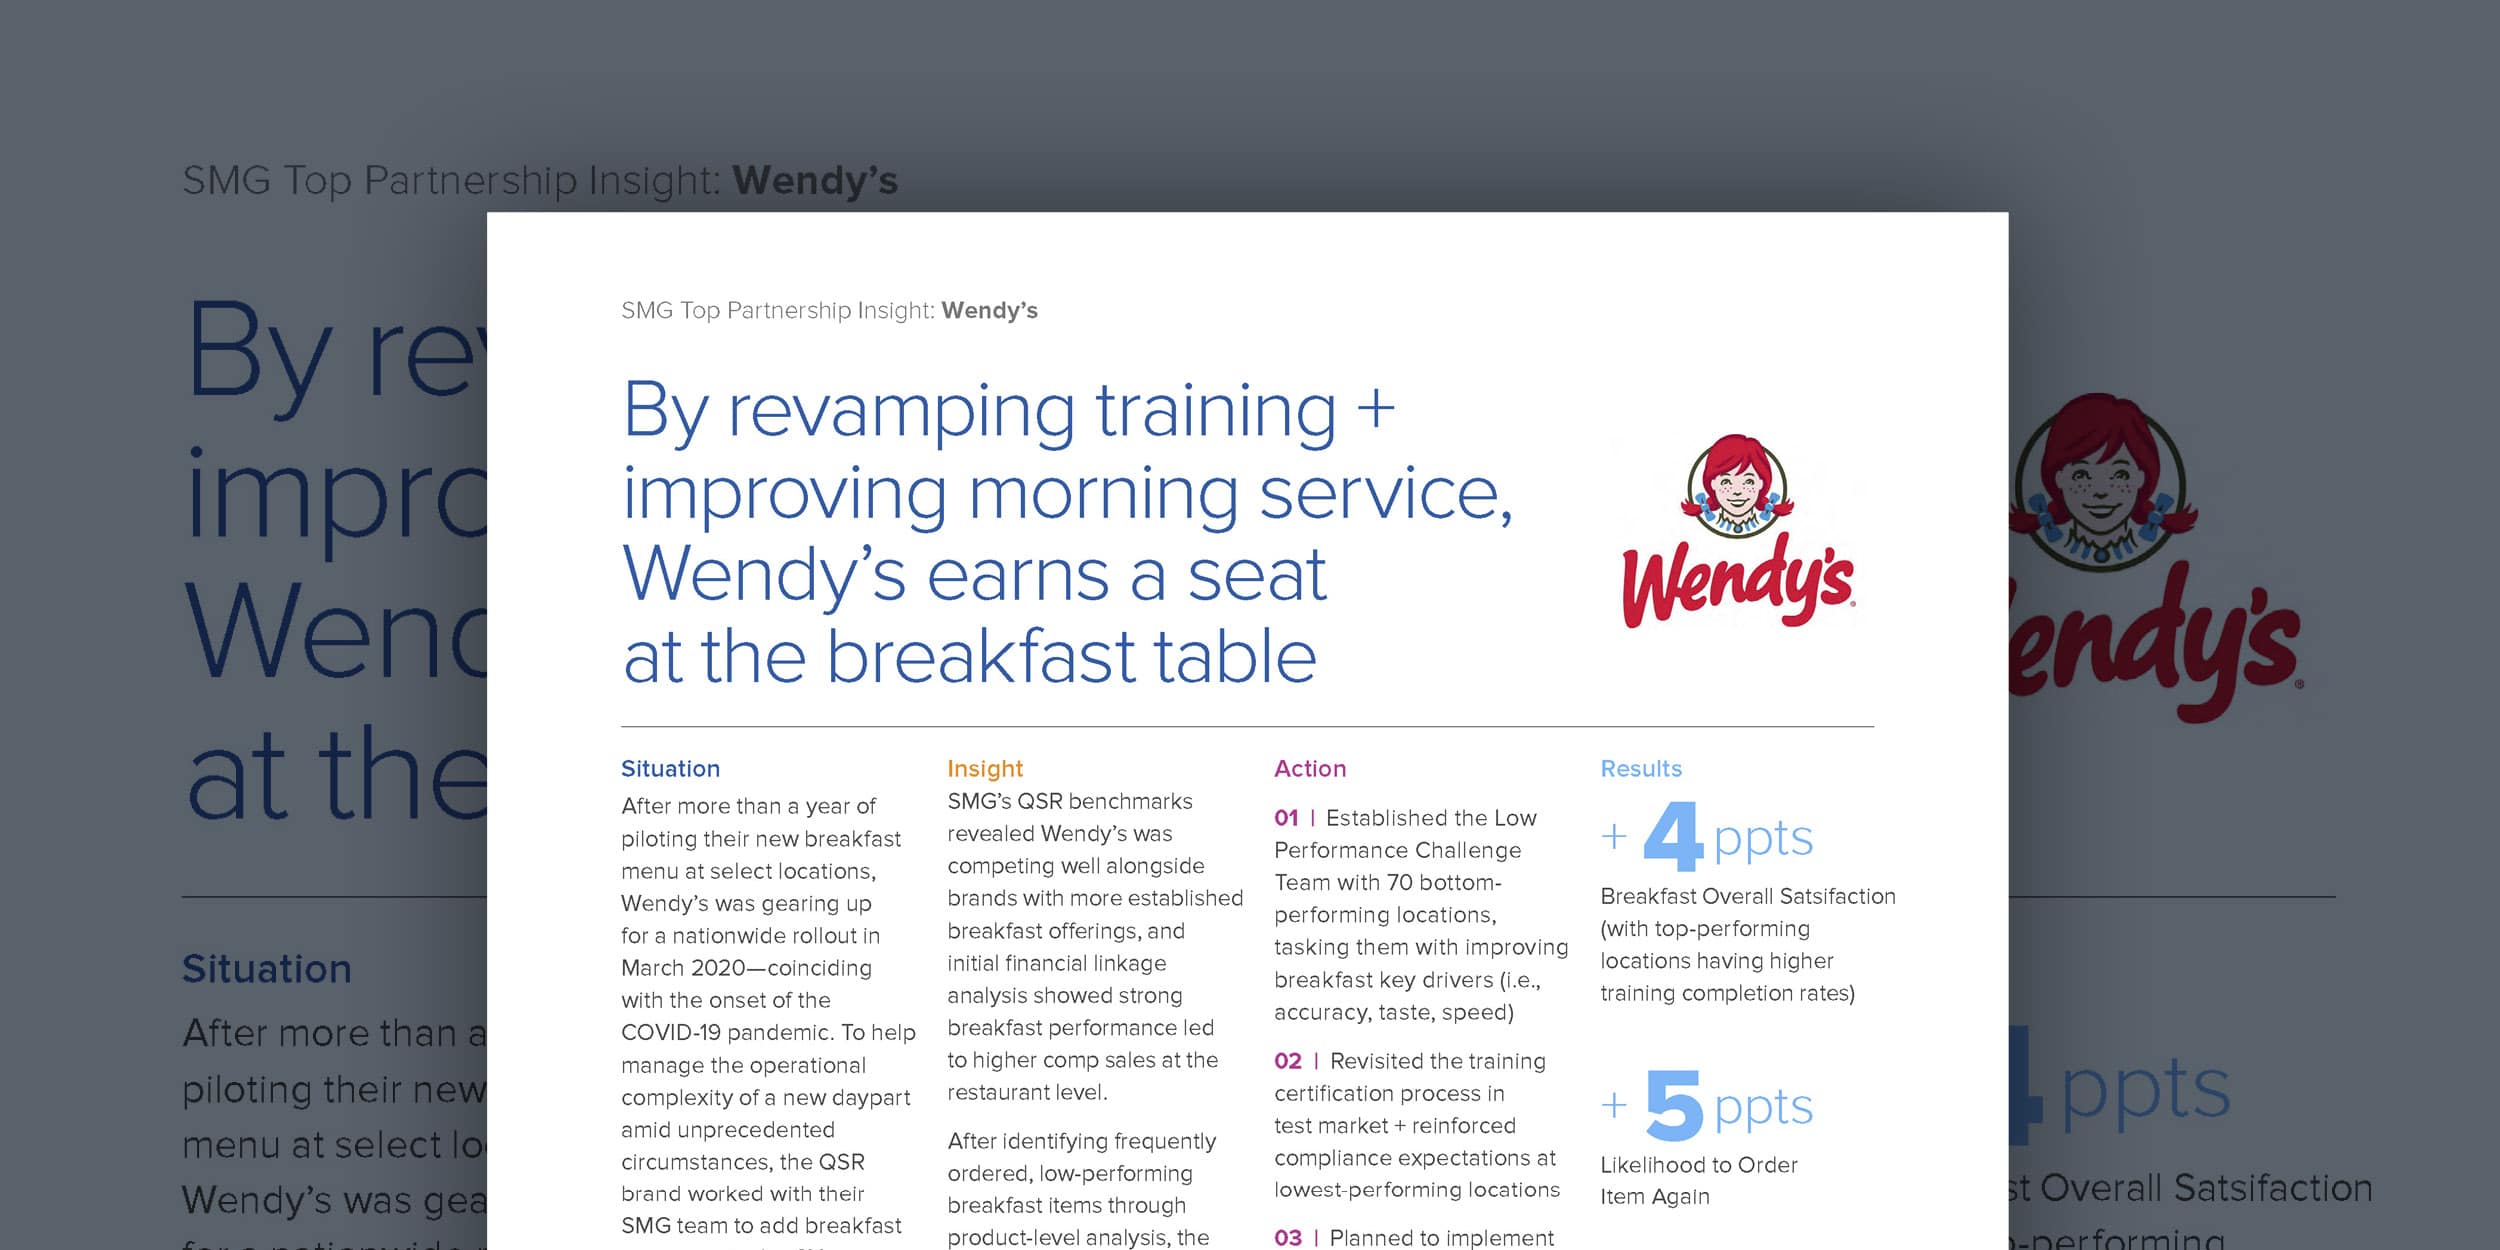 By revamping training + improving morning service, Wendy’s earns a seat at the breakfast table